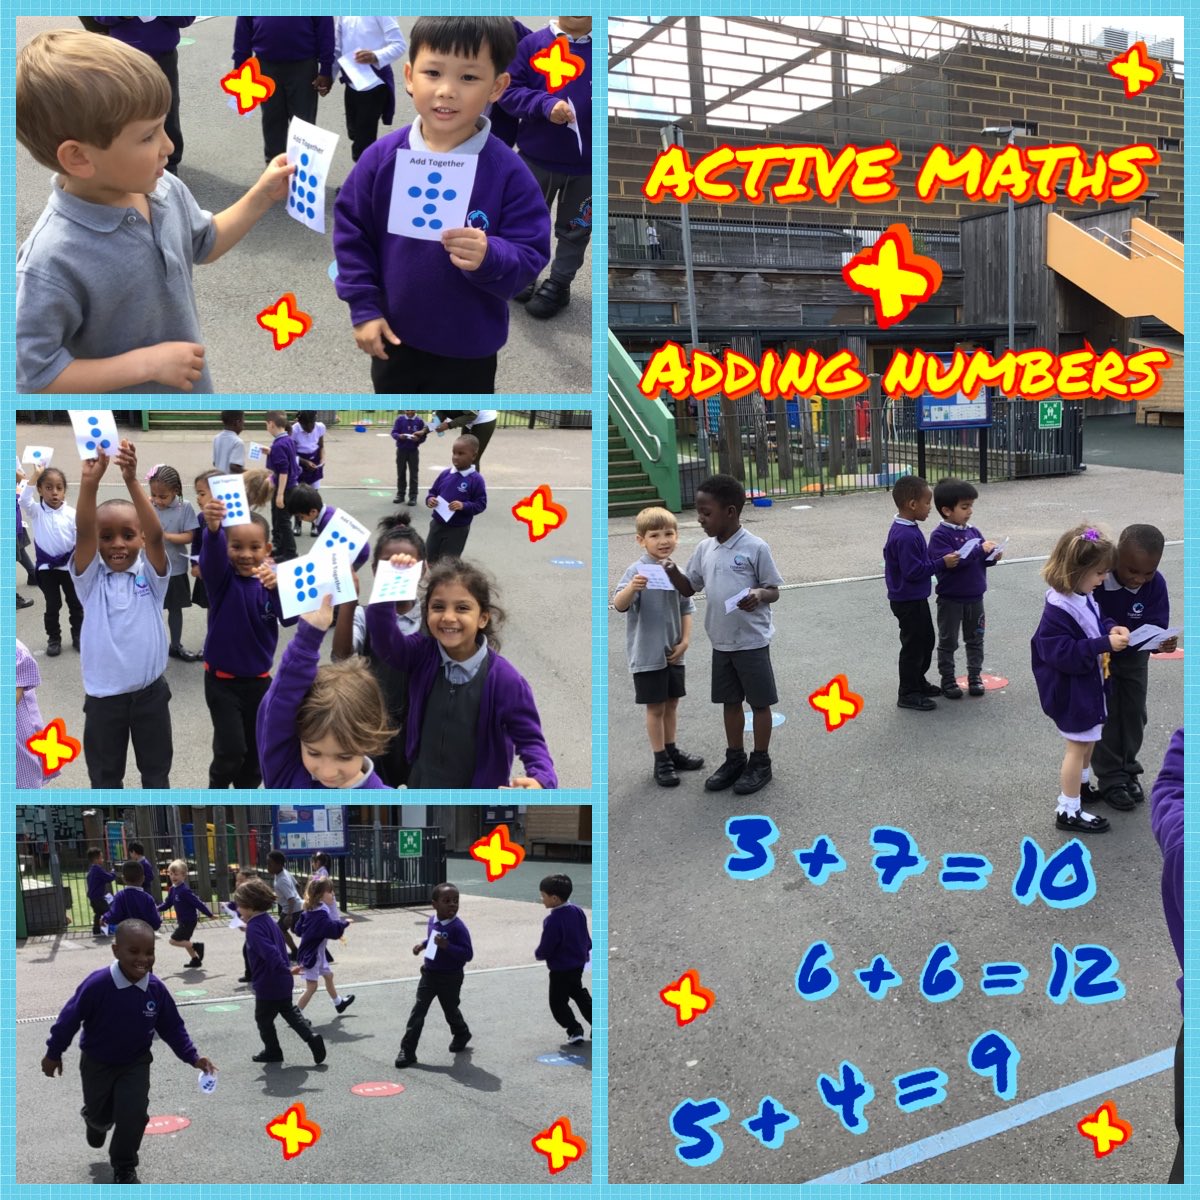 Moving, Pairing & Adding 💫 Our active Maths session was a hit! Check out our little mathematicians in action, pairing up to solve addition problems together. 💪 RR #MathsIsFun ⁦@TeachActive⁩